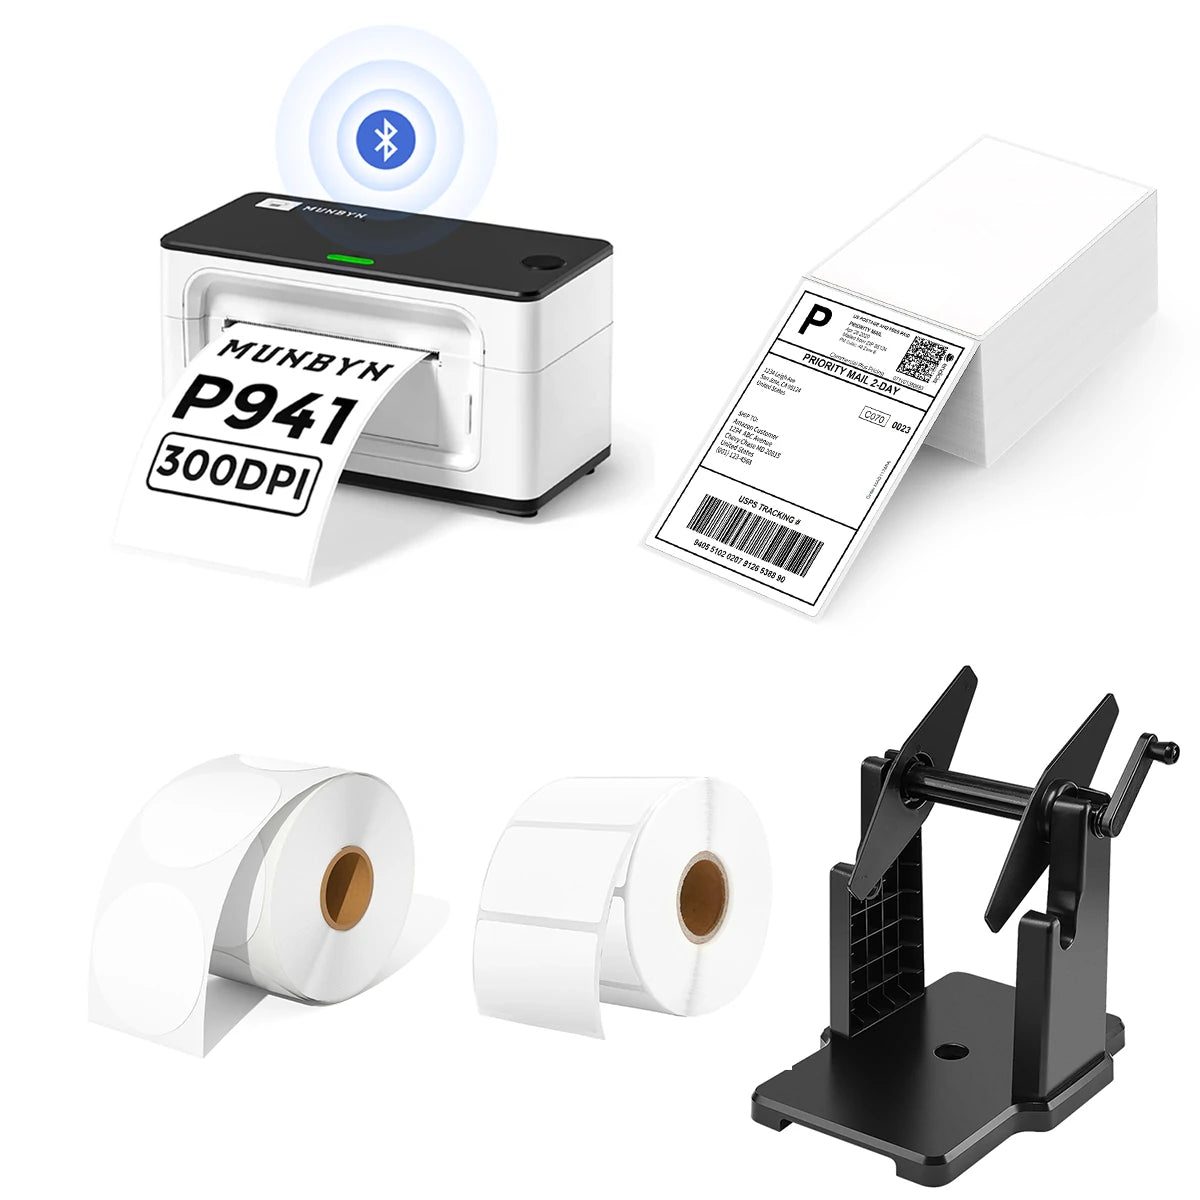 MUNBYN P941B Bluetooth Thermal Label Printer Kit includes a Bluetooth label printer, a label roll holder, two rolls of blank labels, and a stack of shipping labels.